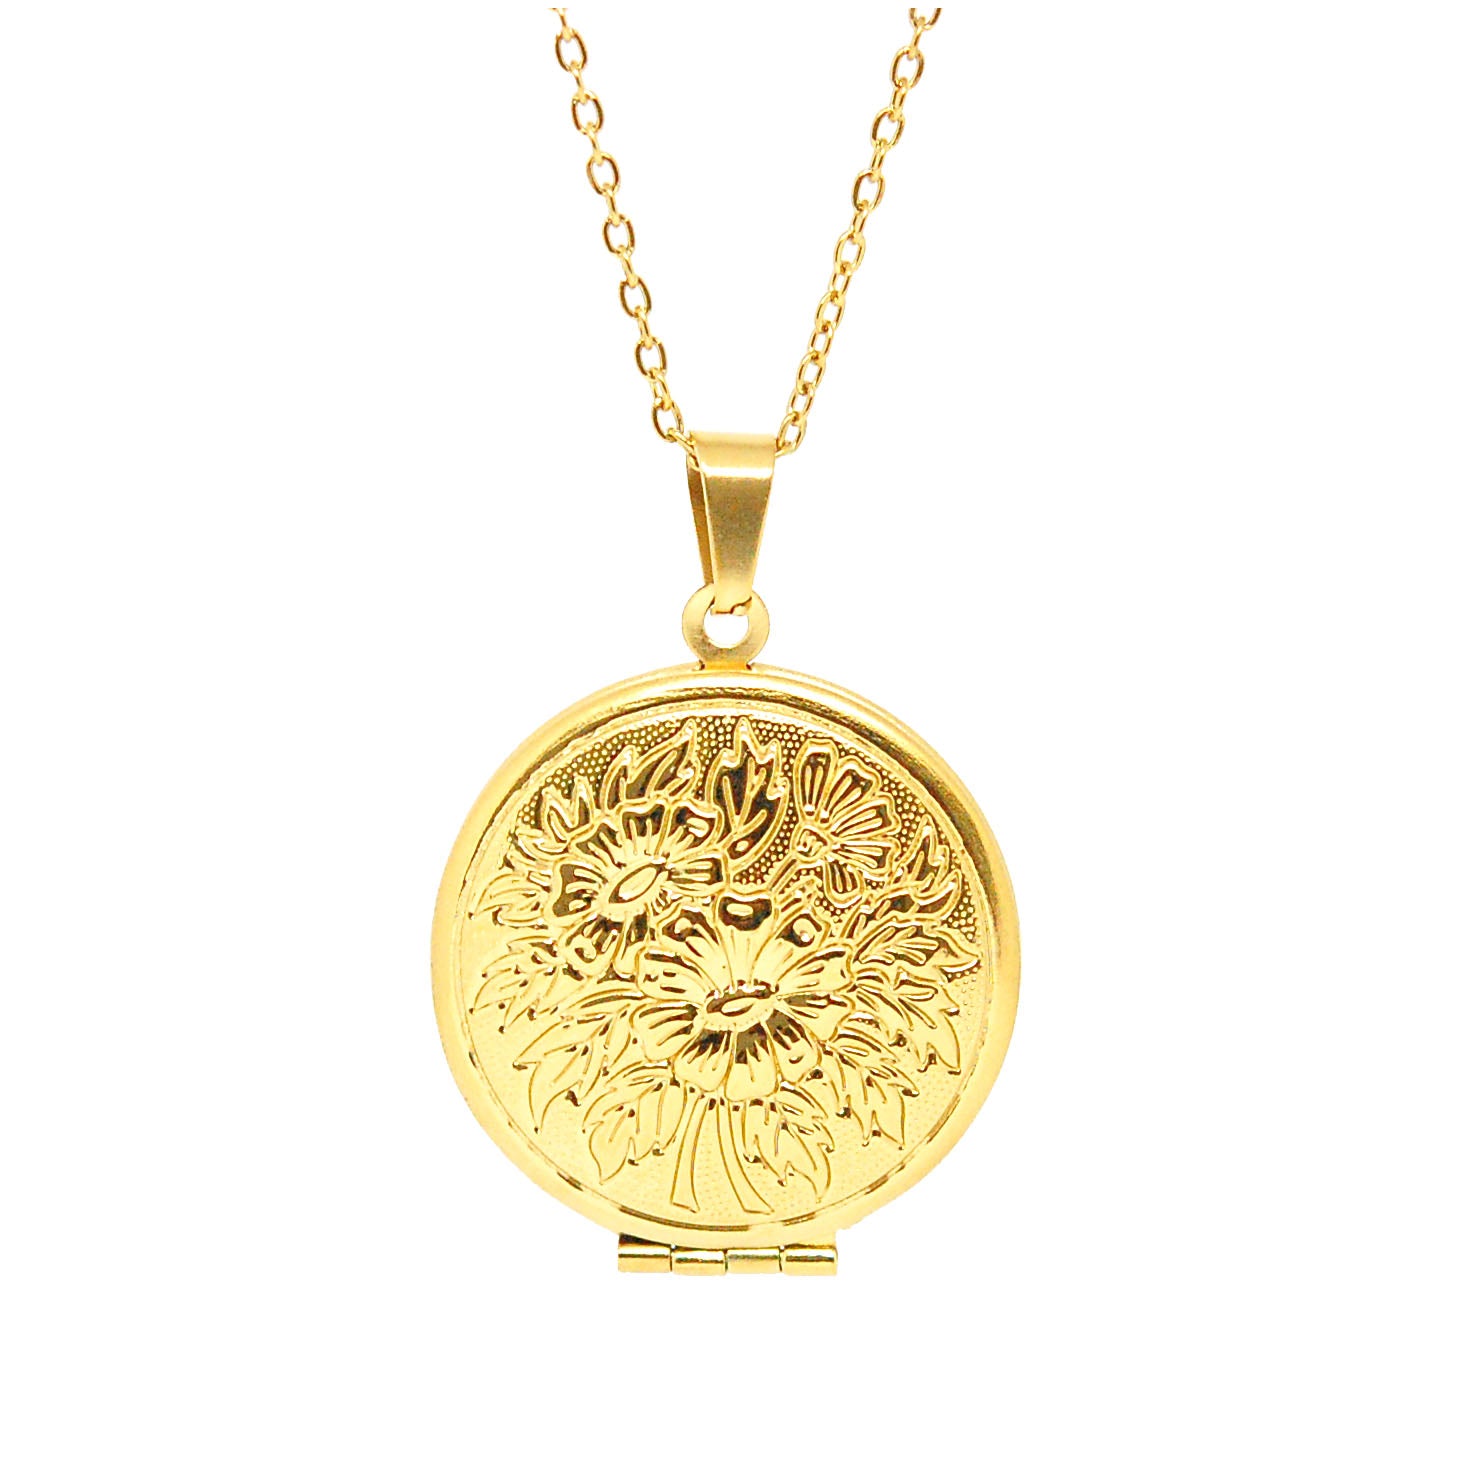 ESN 7634: All IPG 27mm Open-Able European Circle Locket Necklace